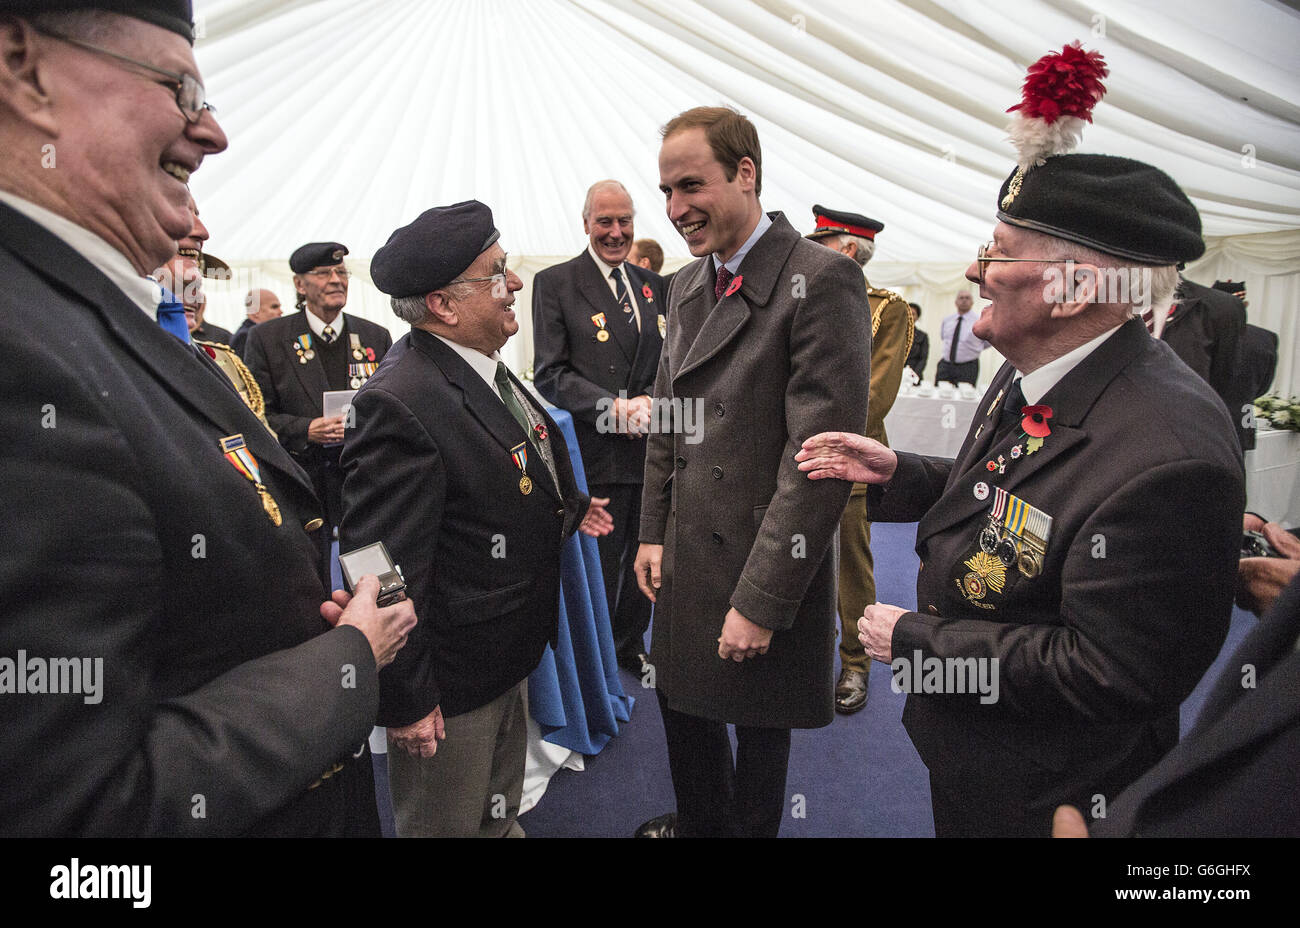 The Duke of Cambridge talks to British veterans of the Korean war following a Korean War Memorial Ground-breaking Ceremony, at Victoria Embankment Gardens in central London. PRESS ASSOCIATION Photo. Picture date: Tuesday November 5, 2013. See PA story ROYAL Korea. Photo credit should read: Richard Pohle/The Times/PA Wire Stock Photo